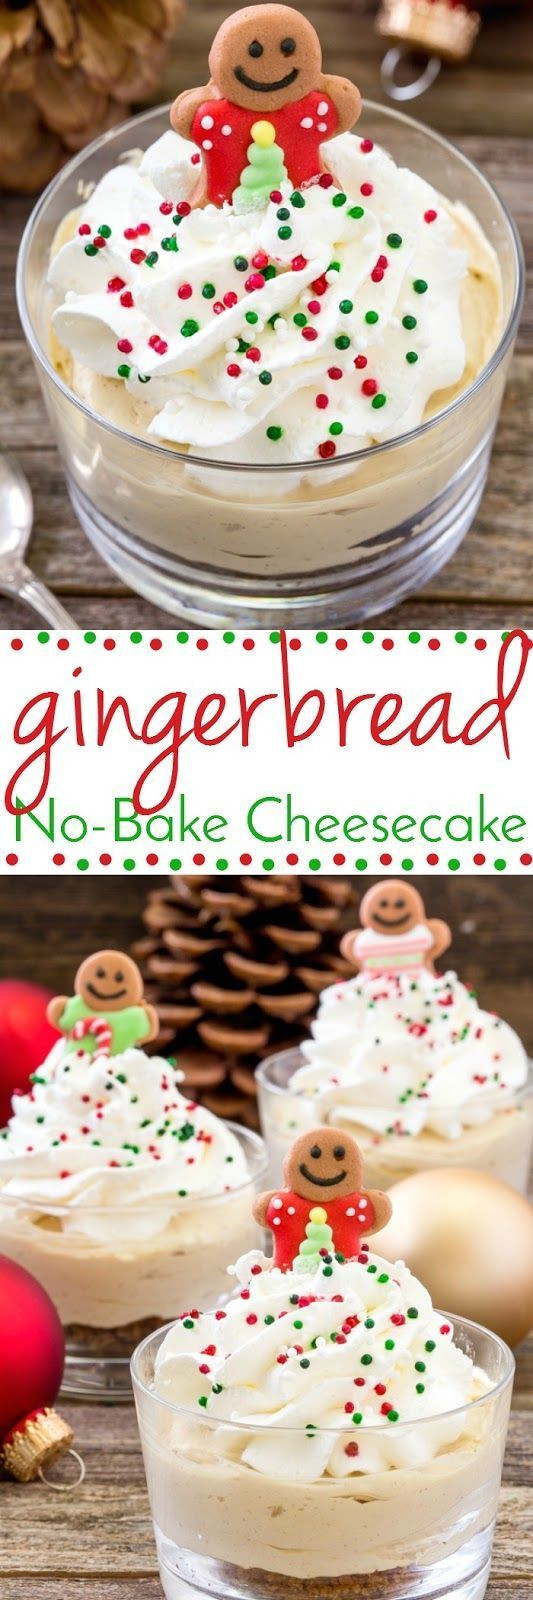 Christmas Desserts Easy
 17 Best images about Christmas Desserts on Pinterest